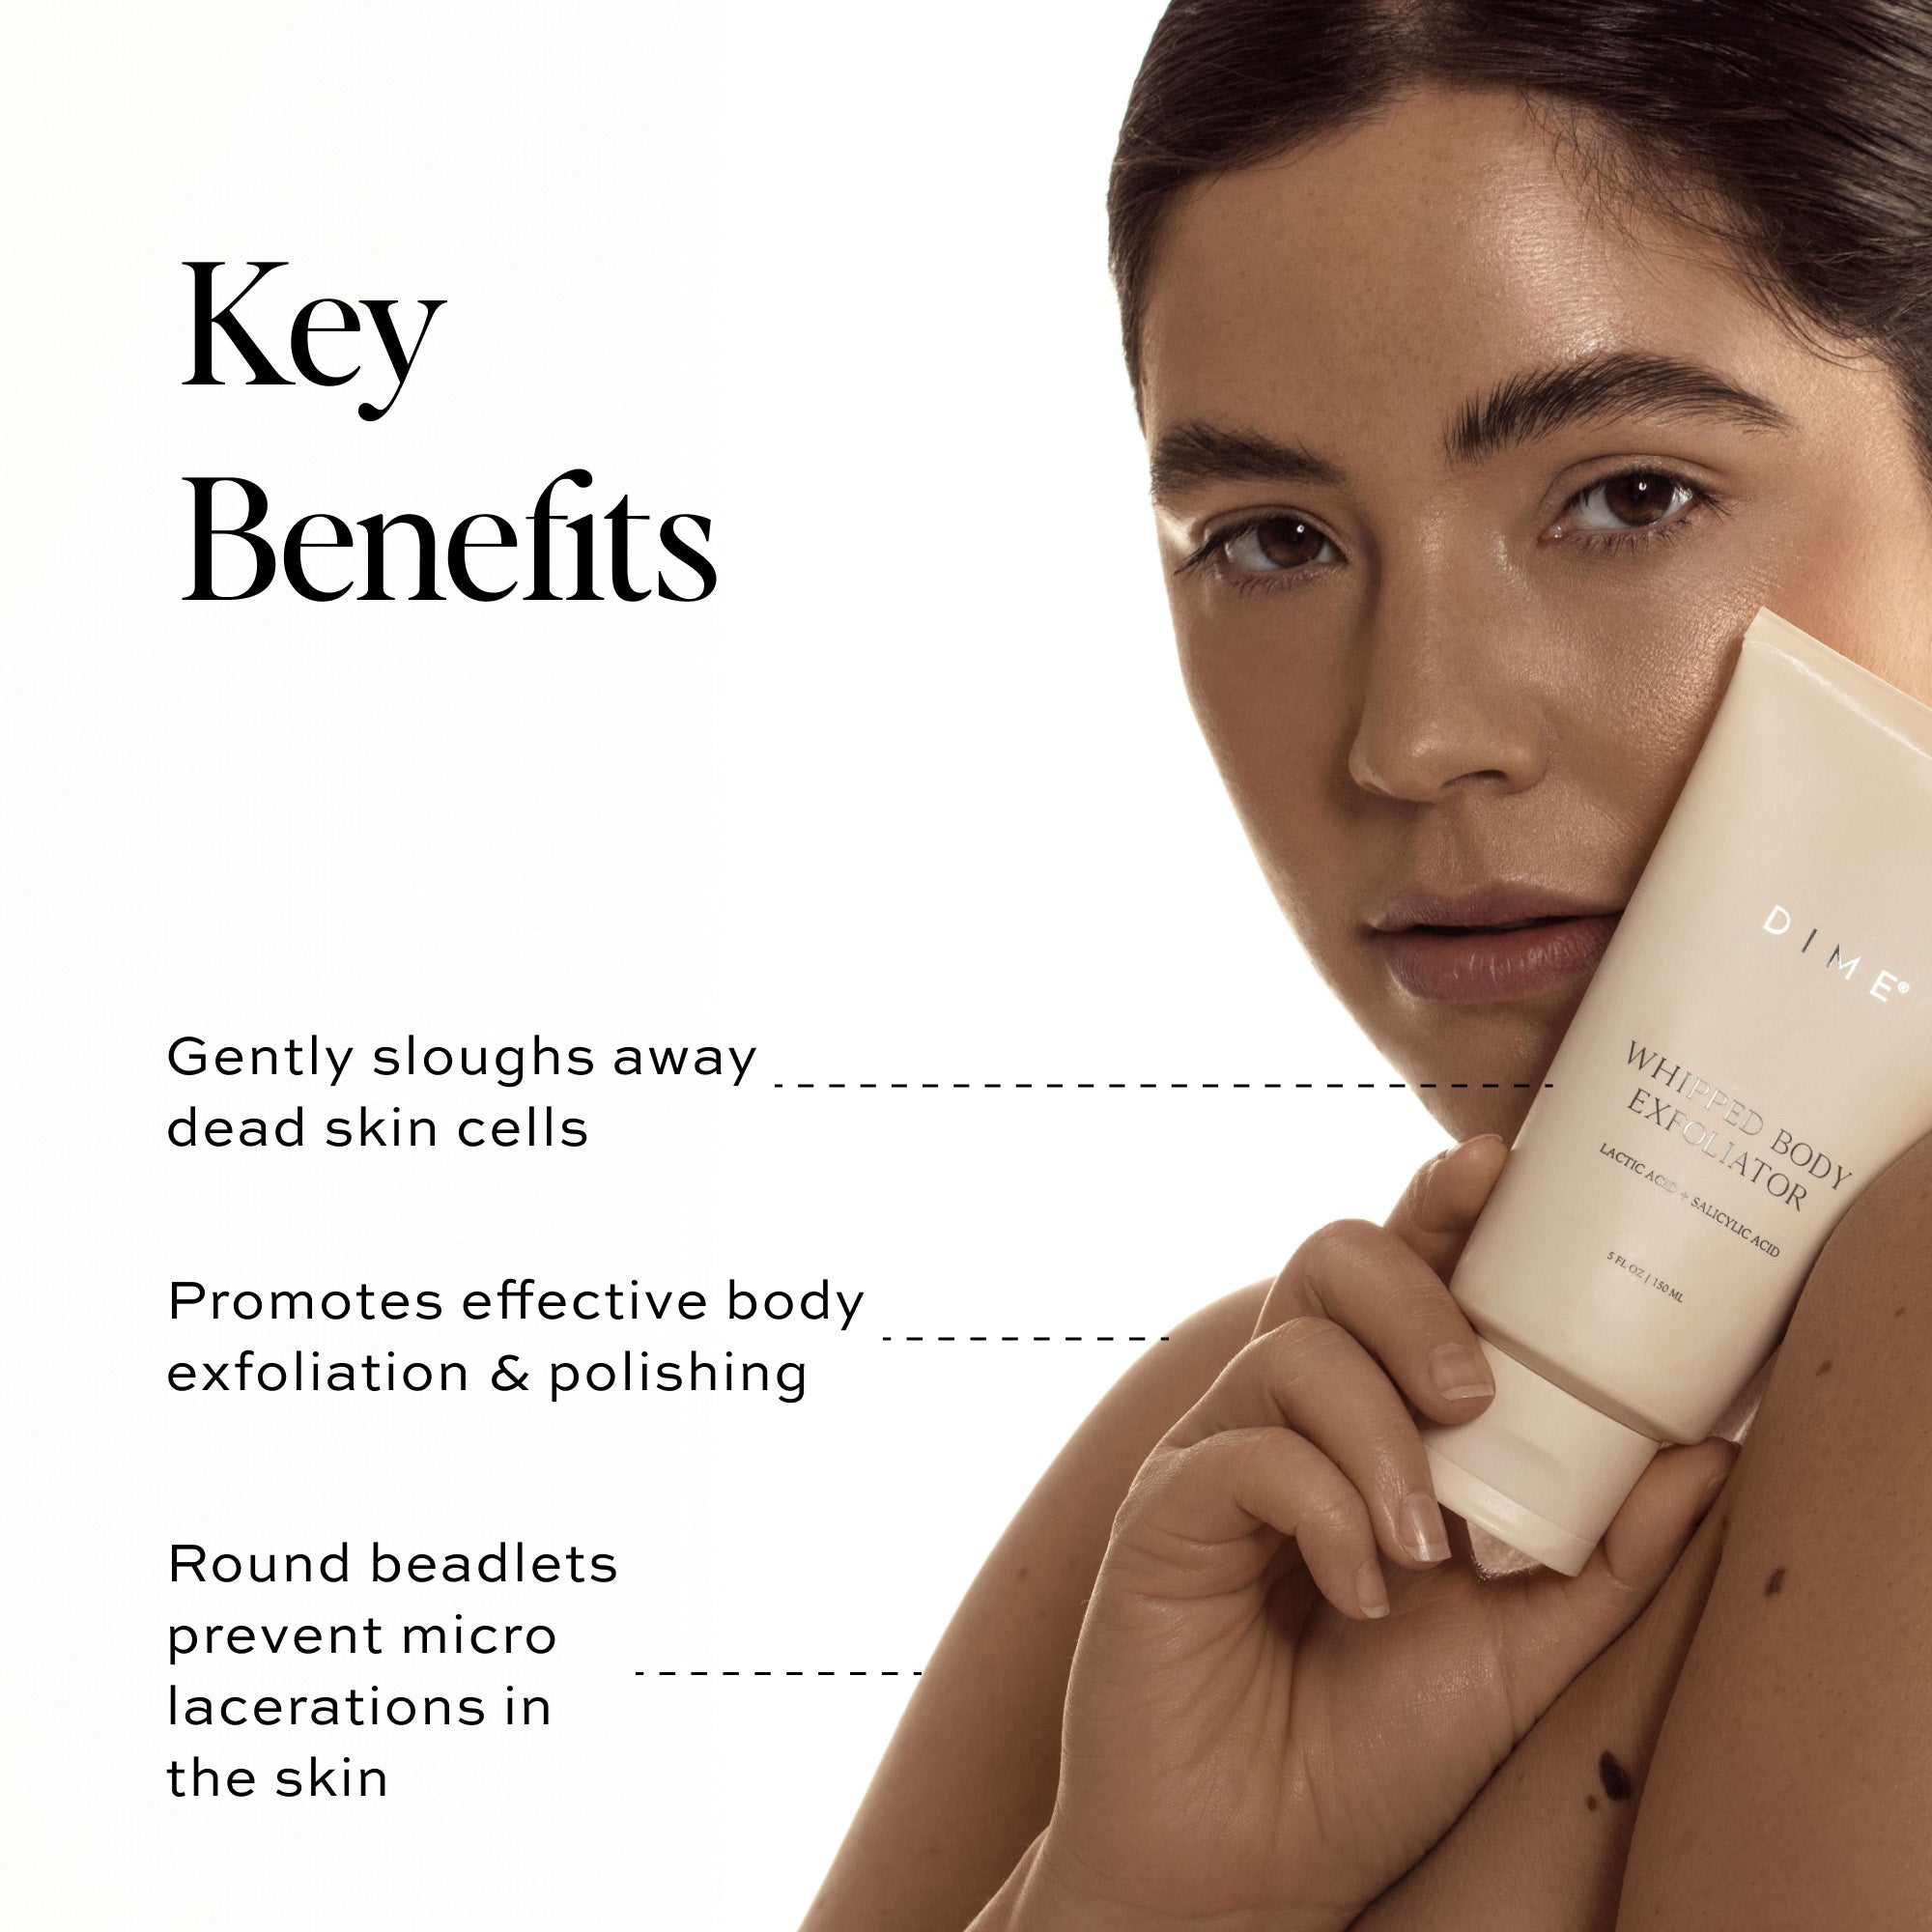 a woman holding a white tube of skincare product